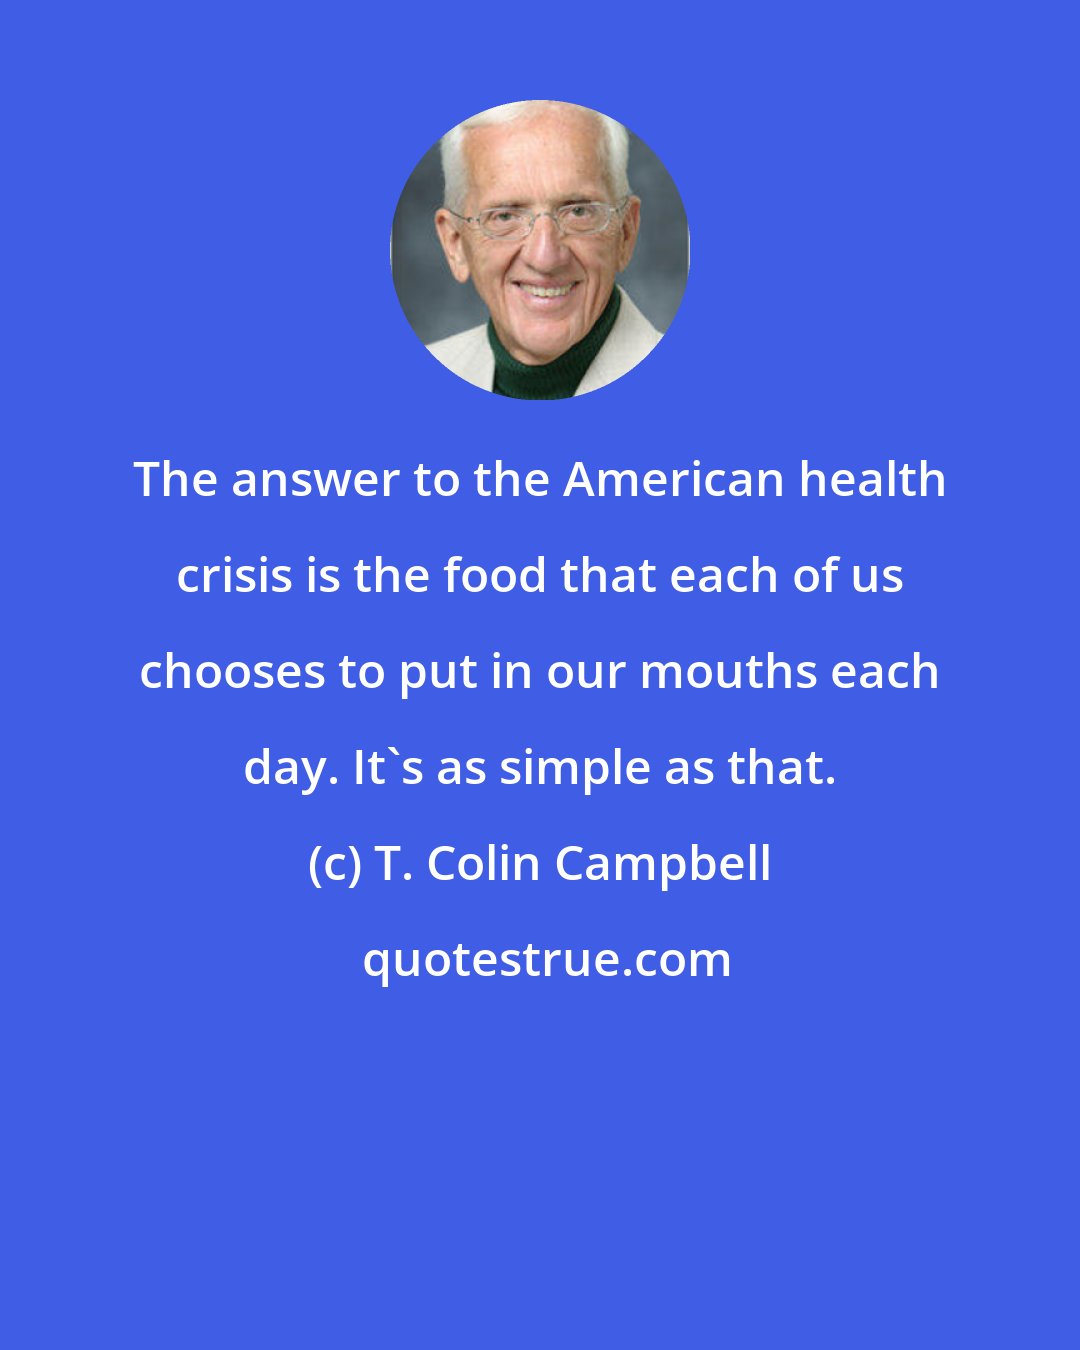 T. Colin Campbell: The answer to the American health crisis is the food that each of us chooses to put in our mouths each day. It's as simple as that.